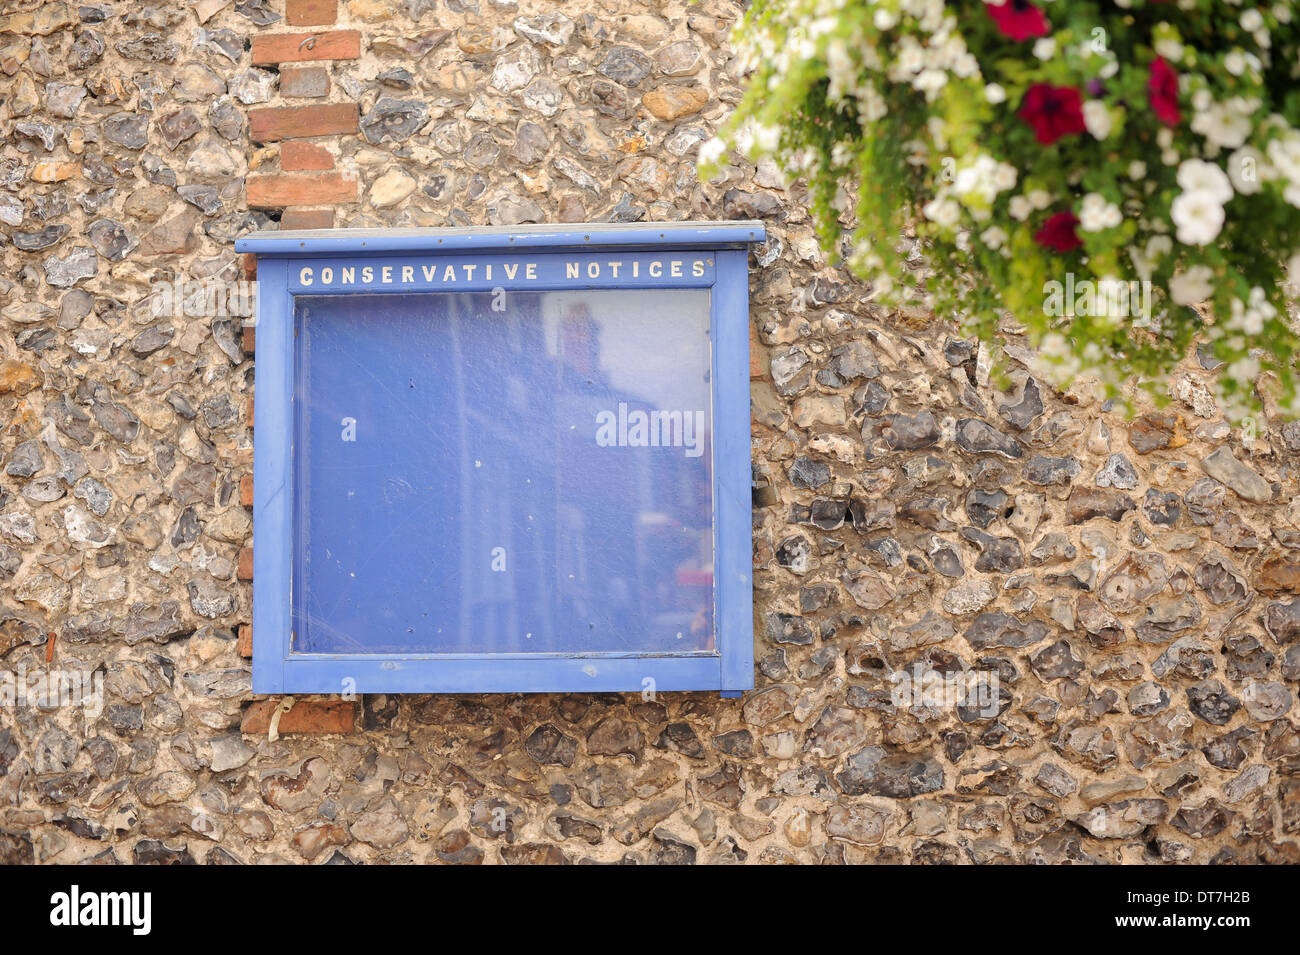 Empty Village Noticeboard, Conservative Party Stock Photo